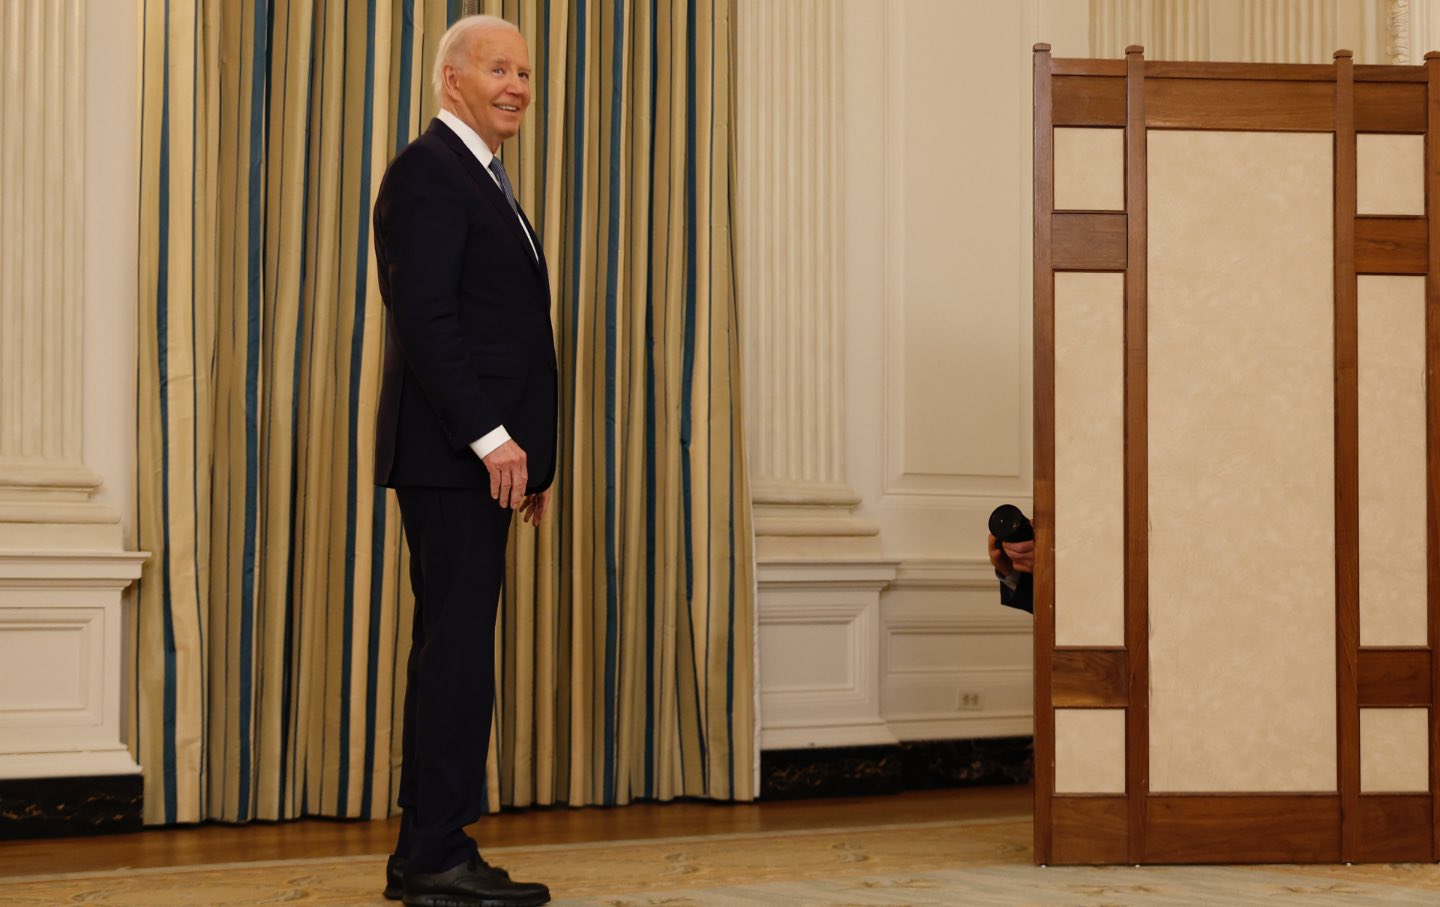 President Joe Biden looks back over his shoulder and smiles while leaving a press conference.